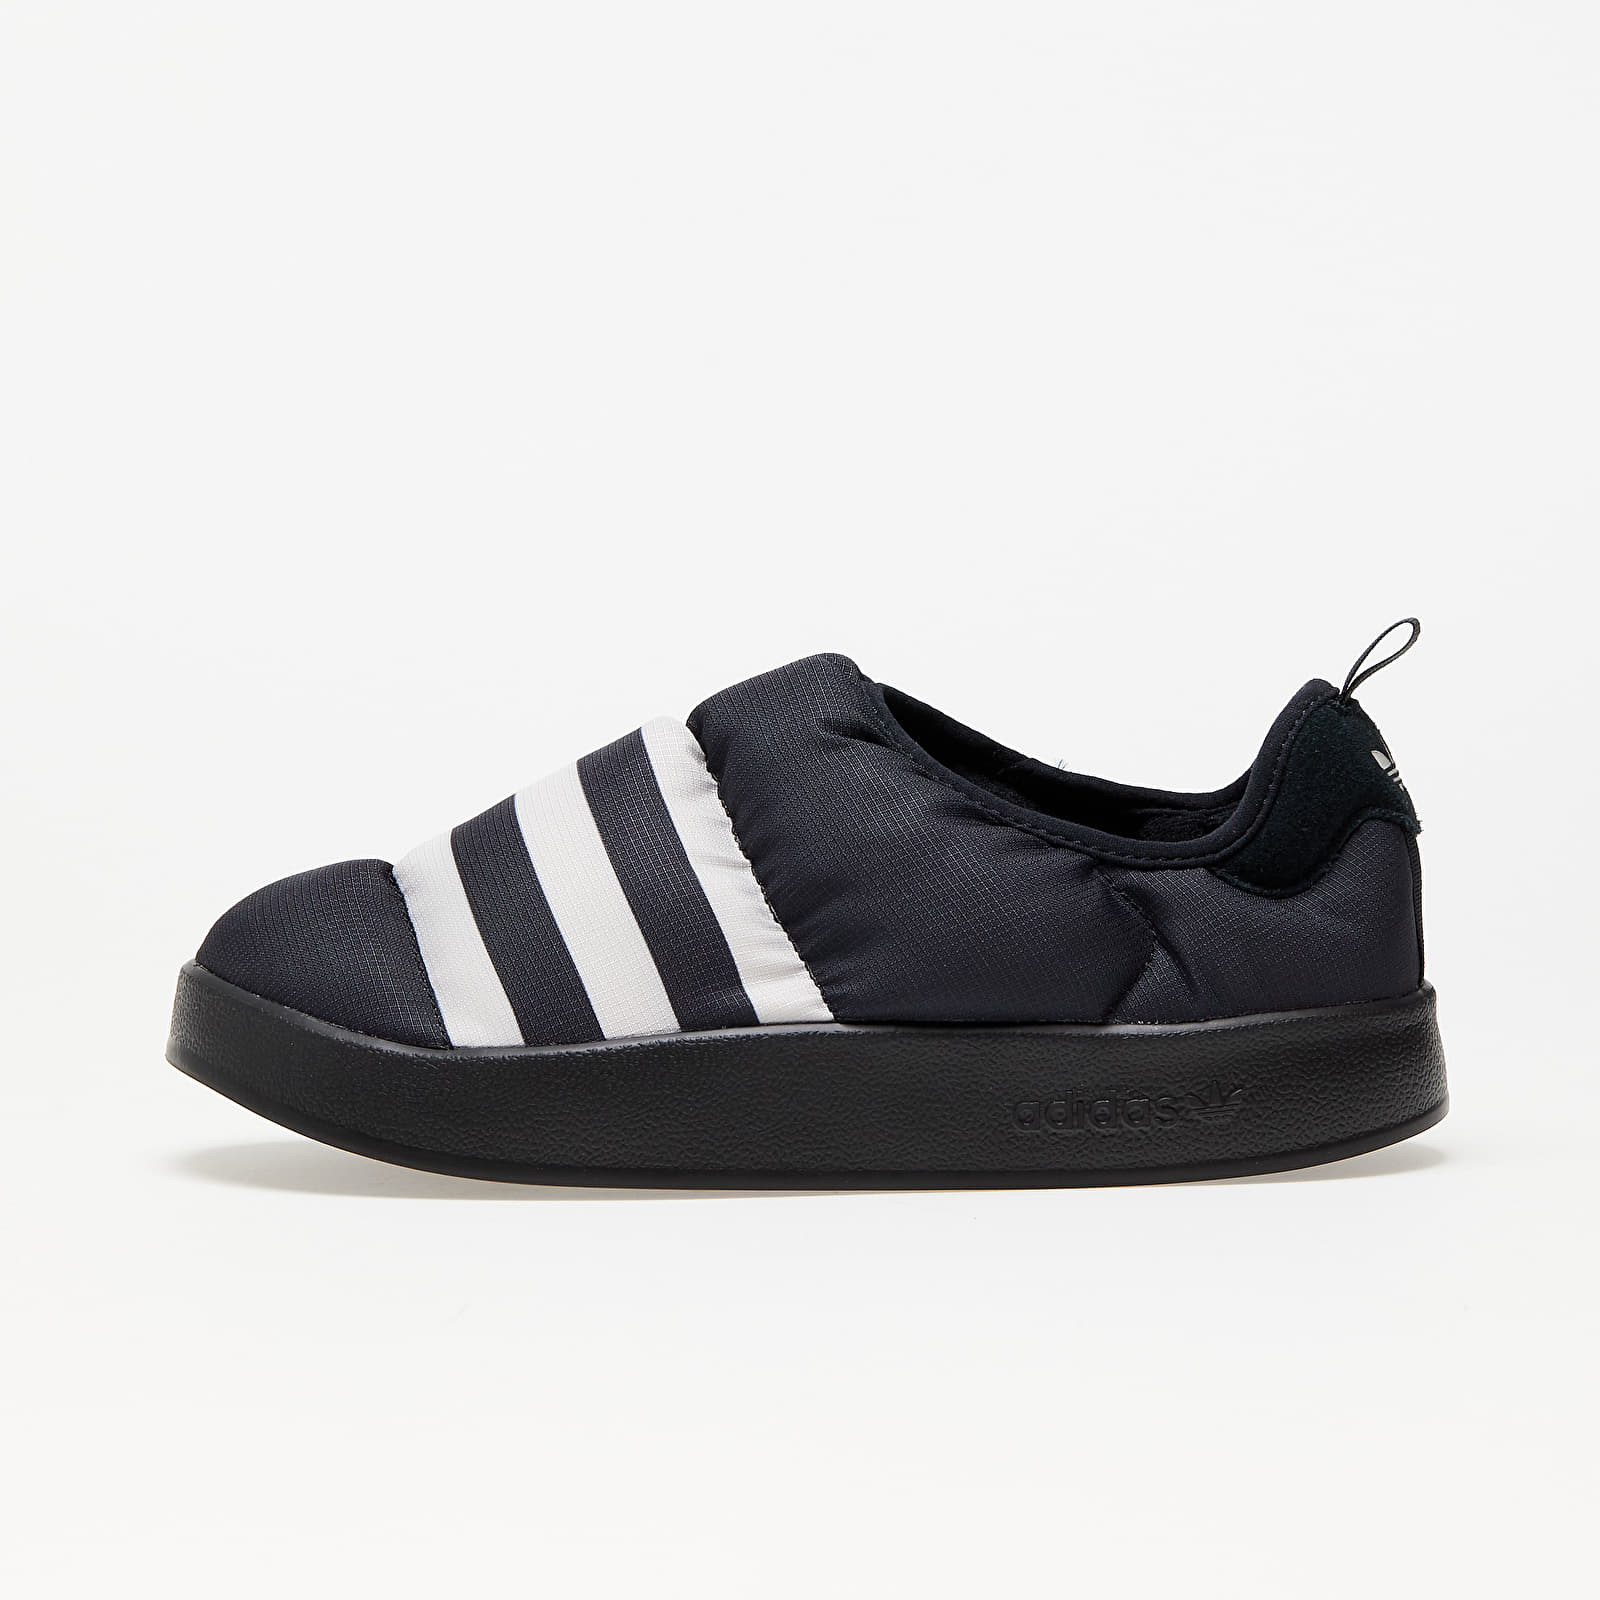 Men's sneakers and shoes adidas Originals Puffylette Core Black/ Grey One/ Core Black